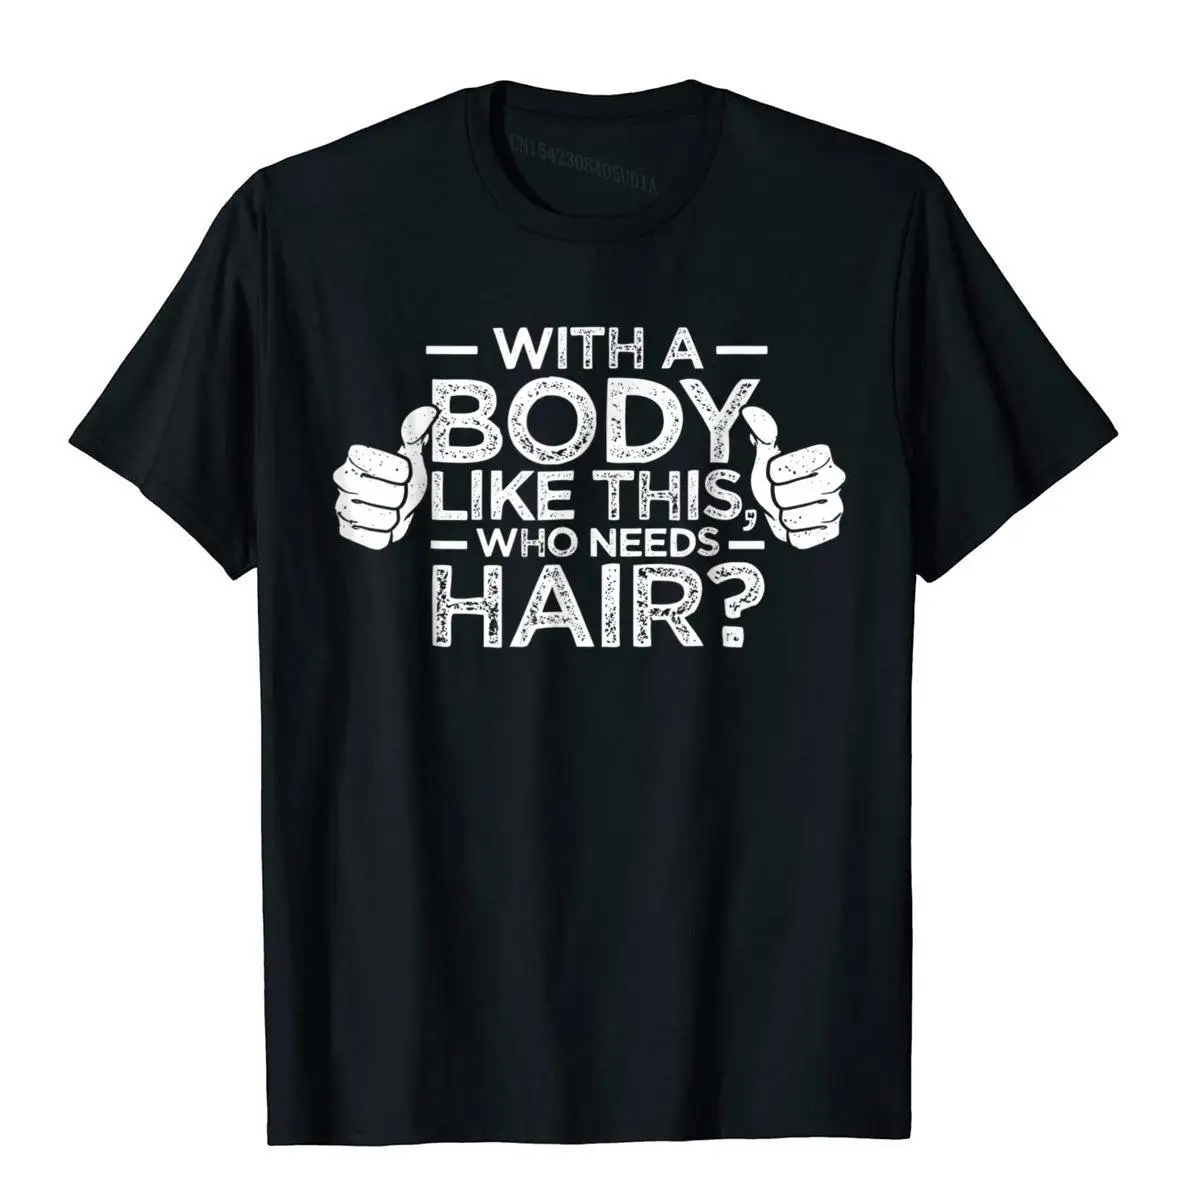 With A Body Like This Who Needs Hair Shirt Bald Gift__97A1320black